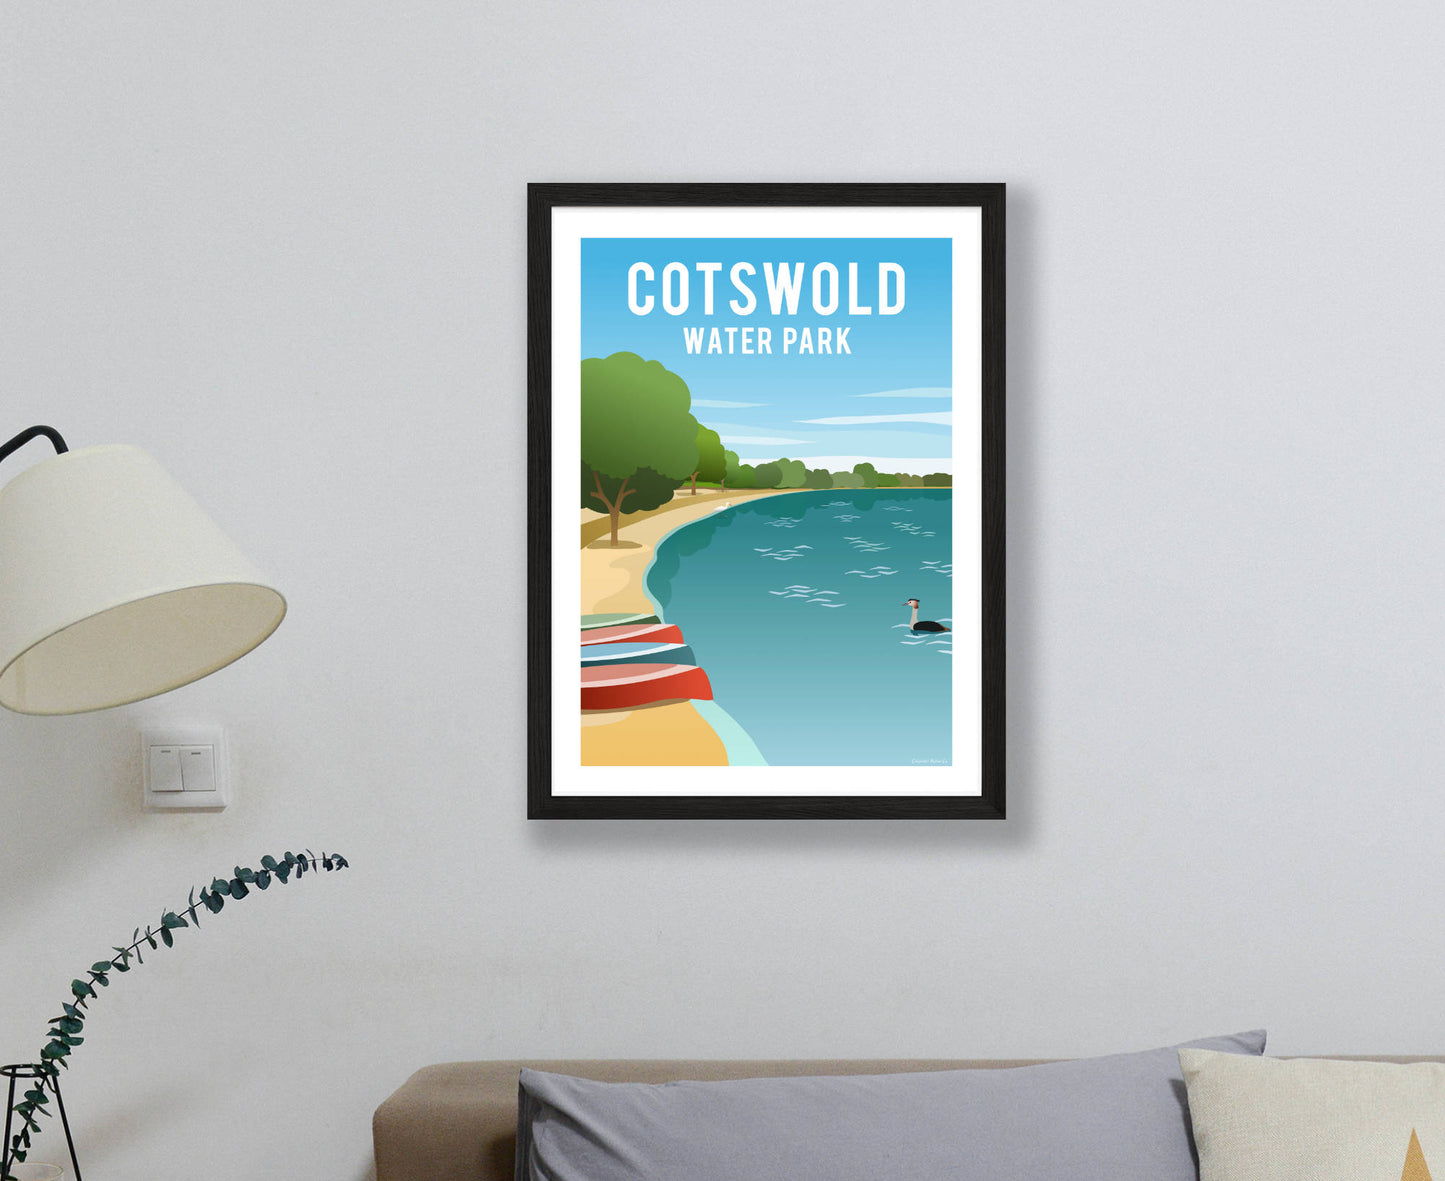 Cotswold Water Park Poster in black frame